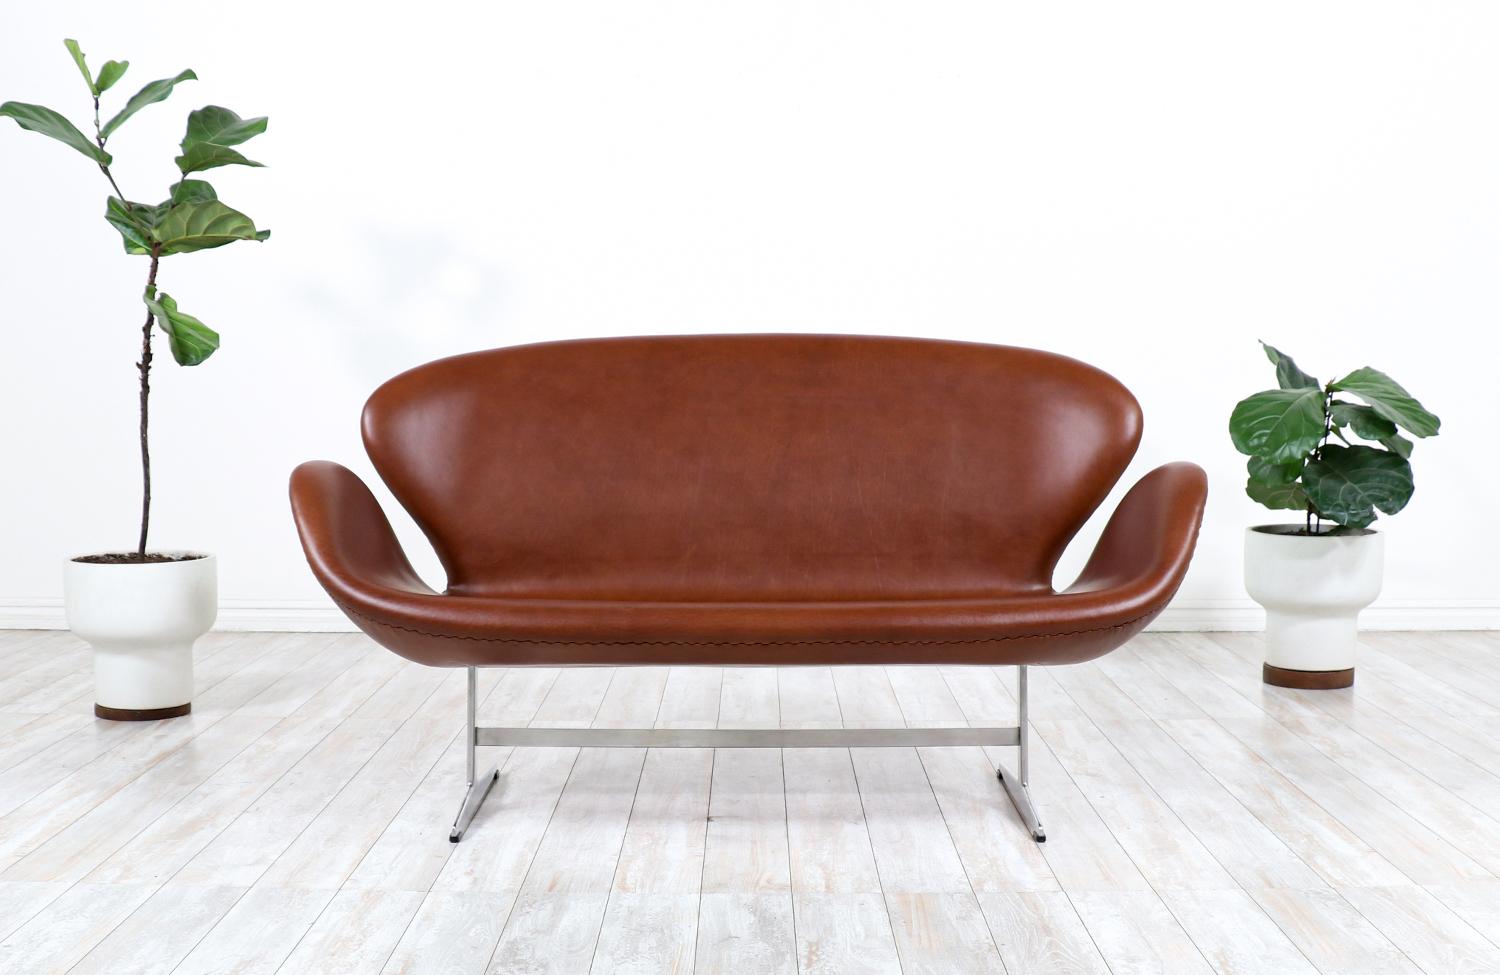 Originally designed for the SAS Royal Hotel in Copenhagen, the Swan sofa by Danish design pioneer, Arne Jacobsen, has become iconic and synonymous with Danish Modern. Reupholstered in a gorgeous new cognac Full-Grain Leather, this comfortable design